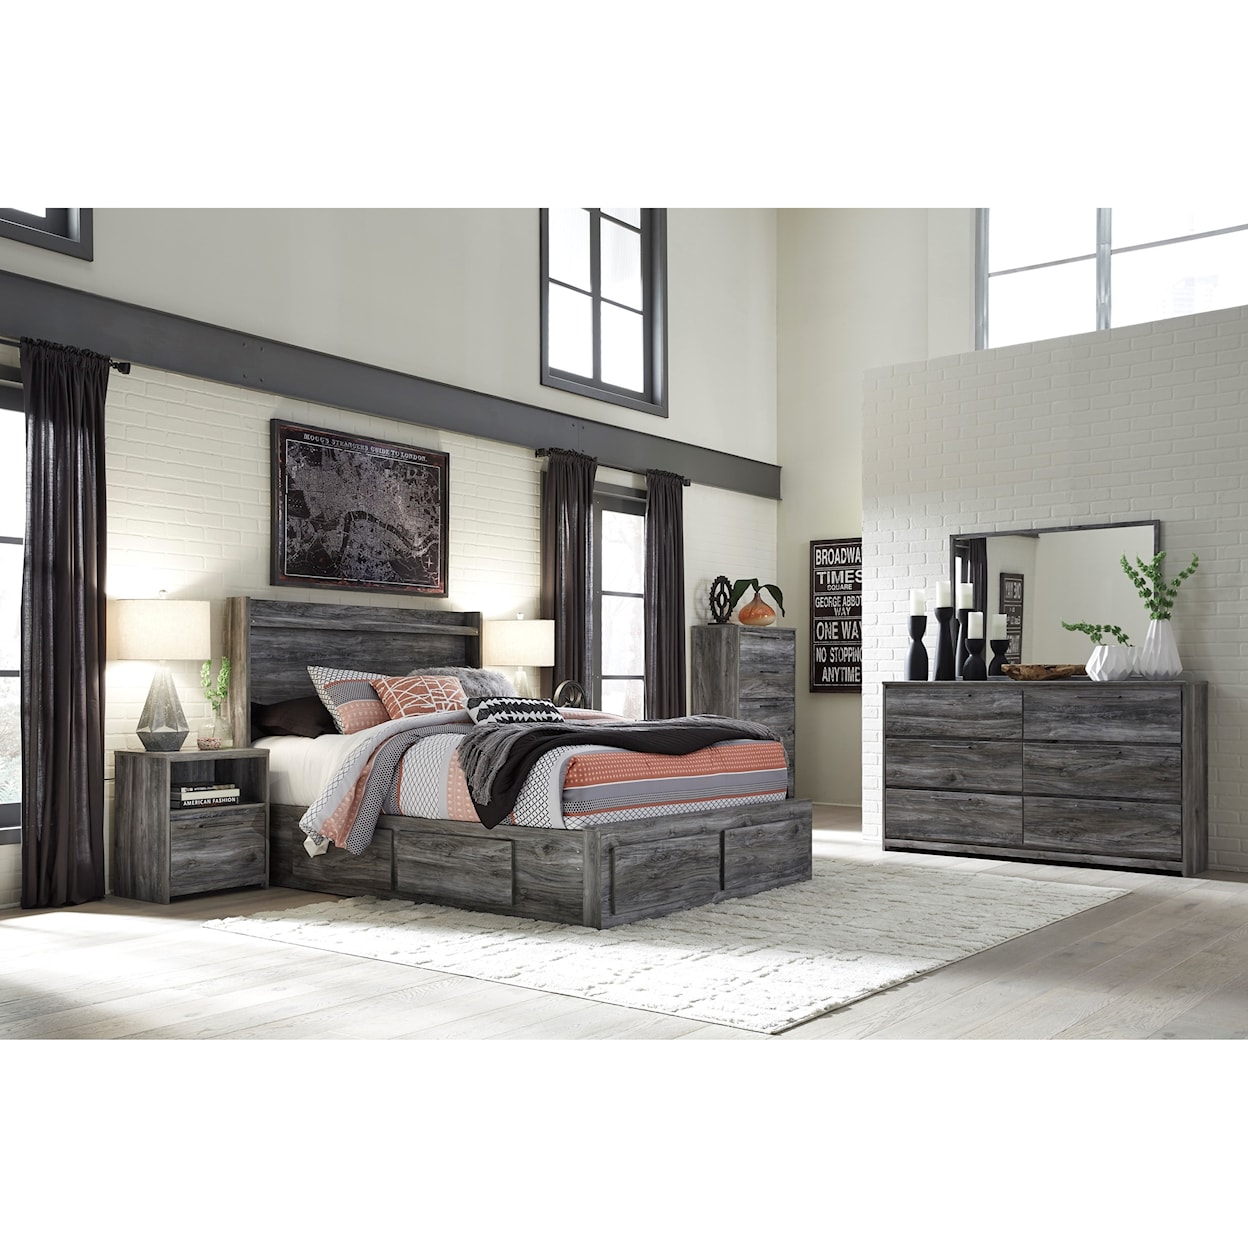 Ashley Signature Design Baystorm Queen Storage Bed with 6 Drawers